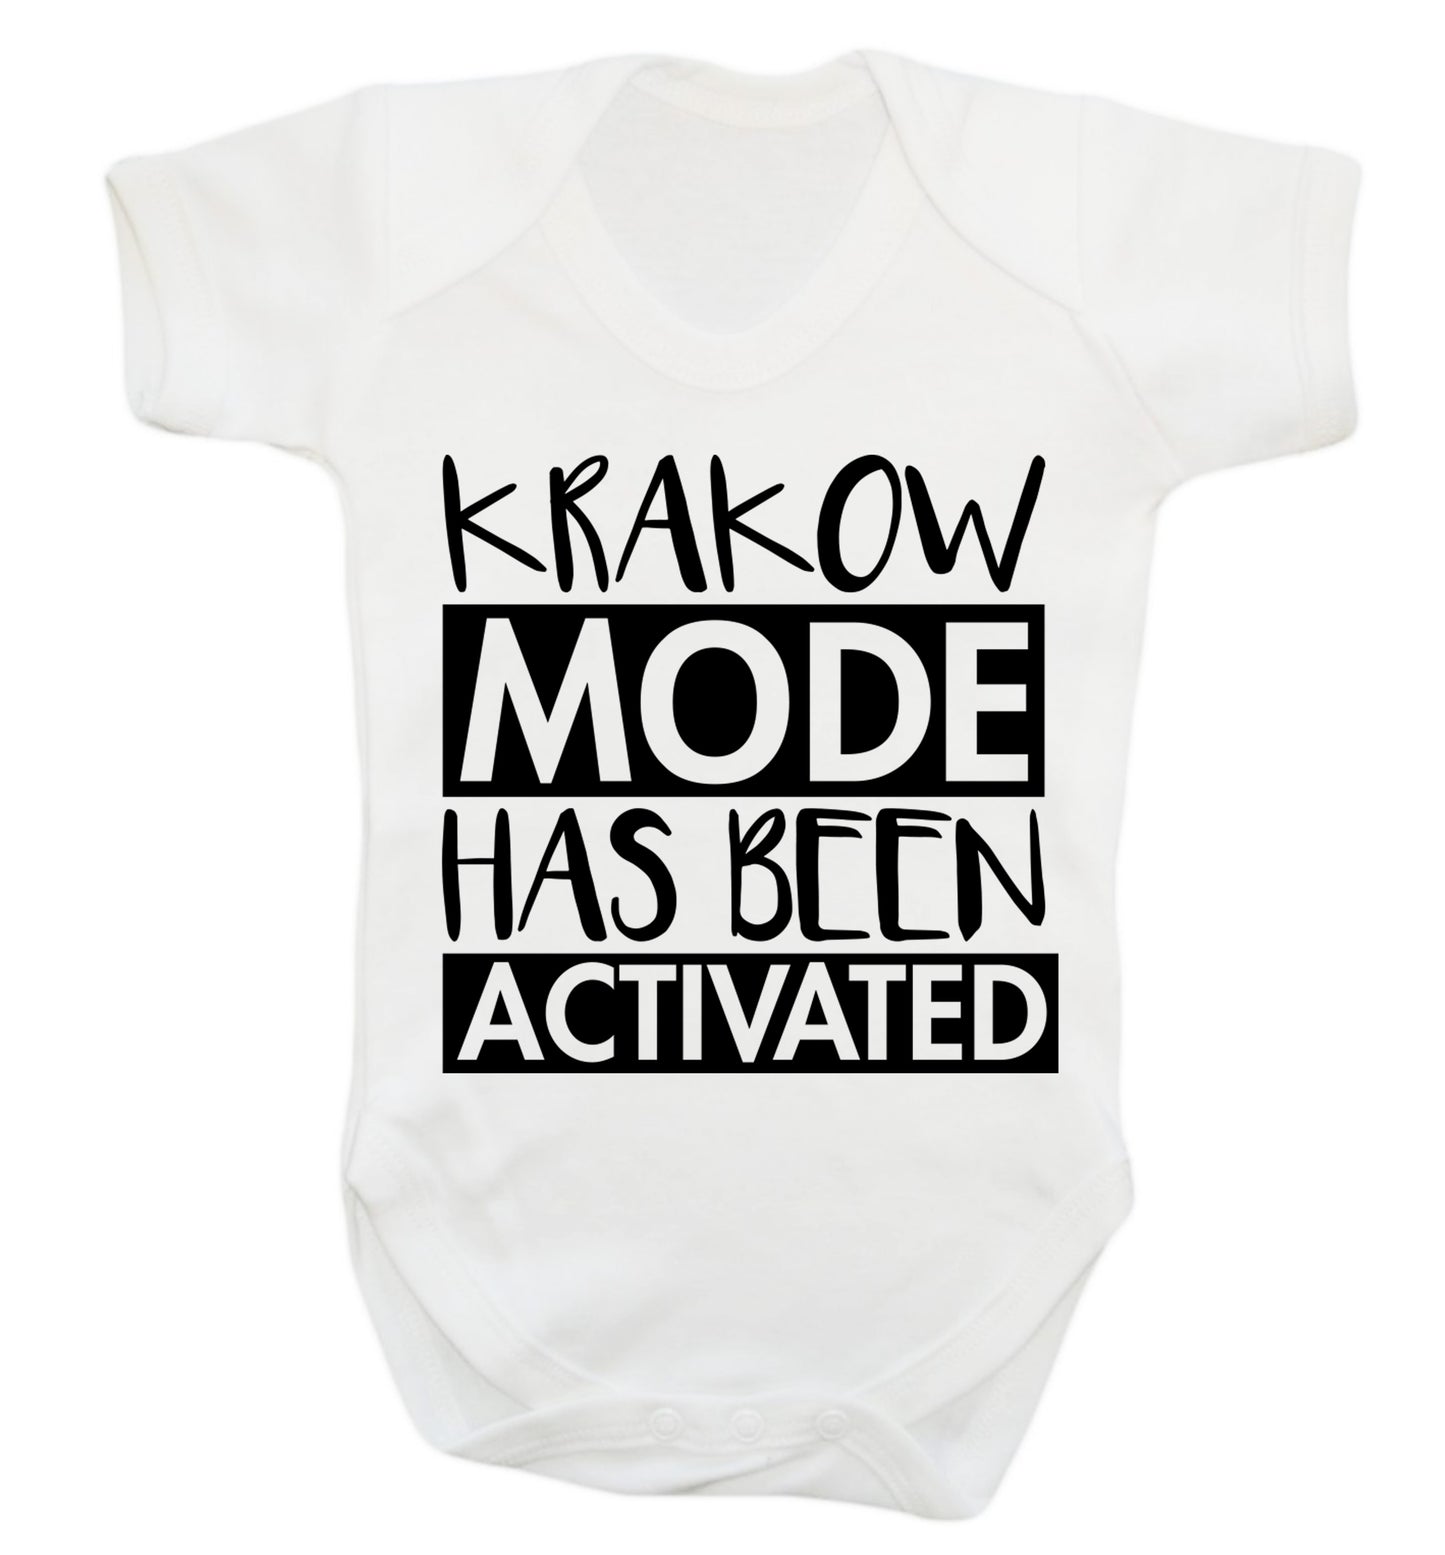 Krakow mode has been activated Baby Vest white 18-24 months